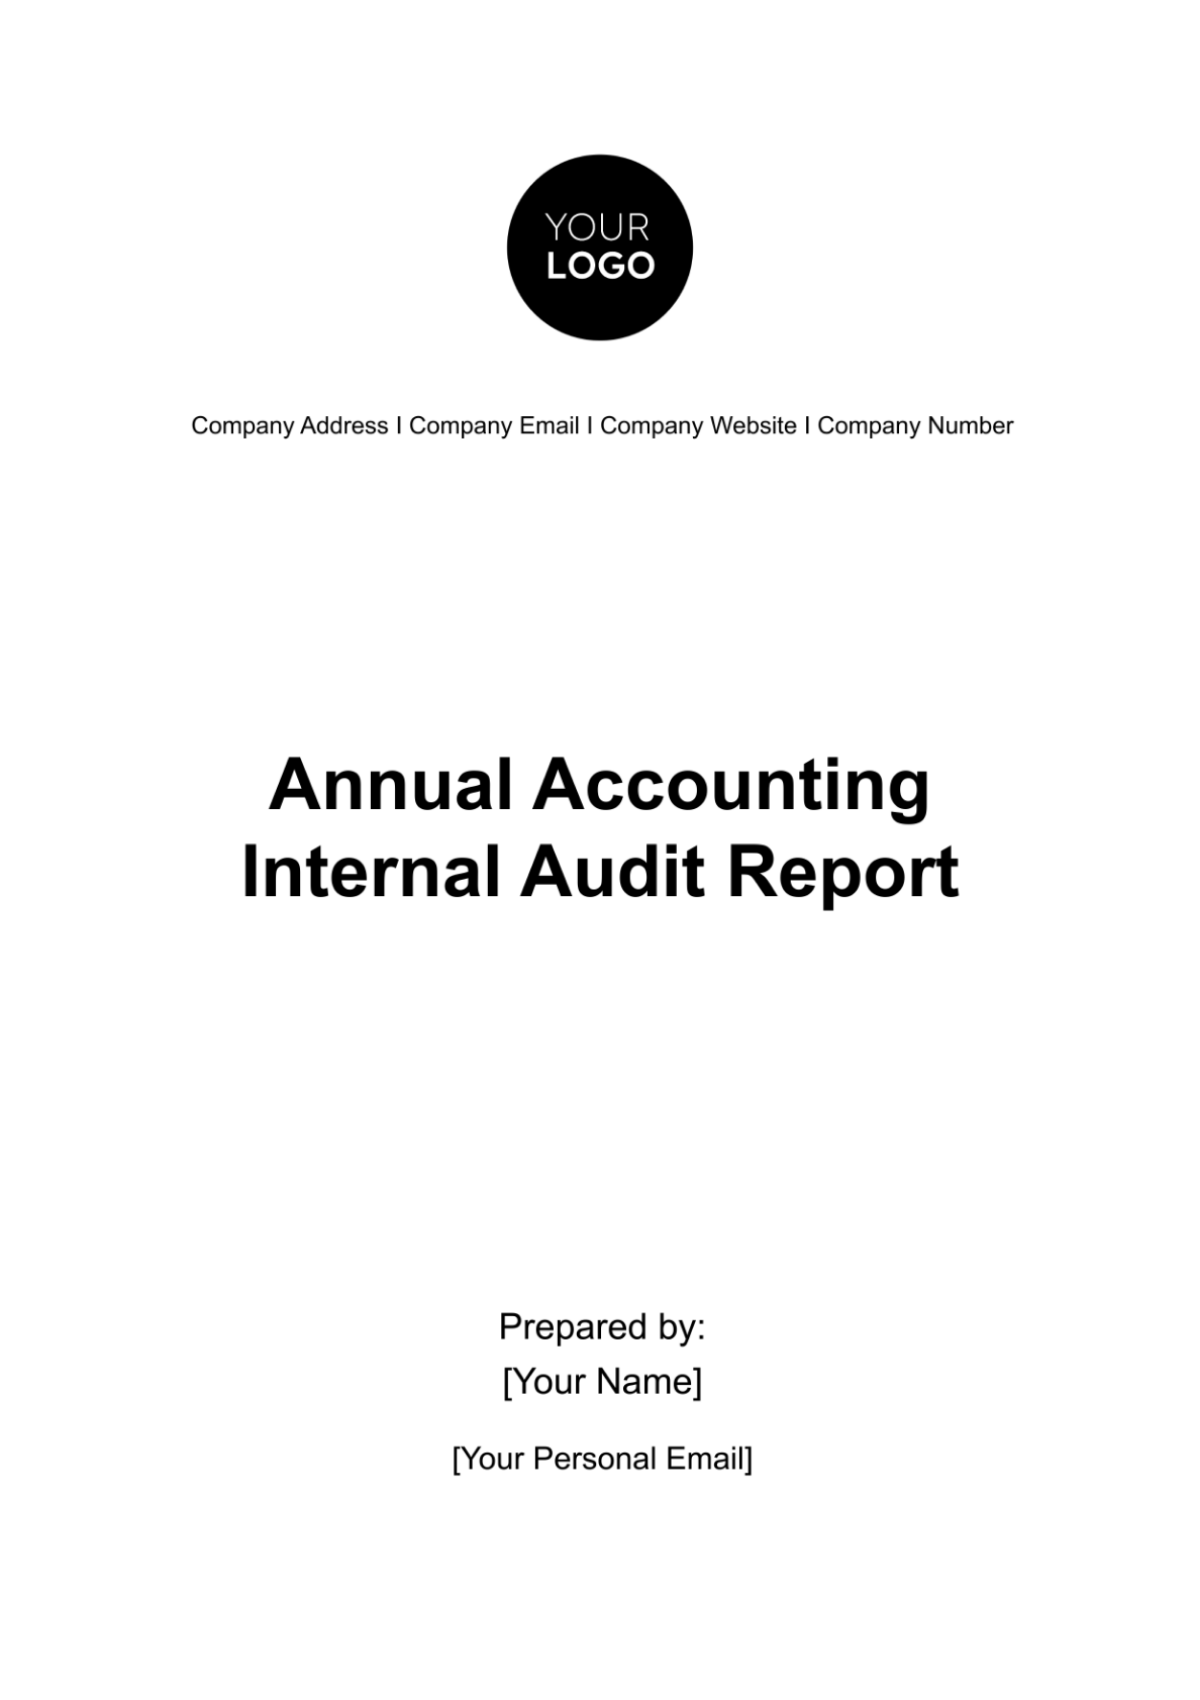 Annual Accounting Internal Audit Report Template